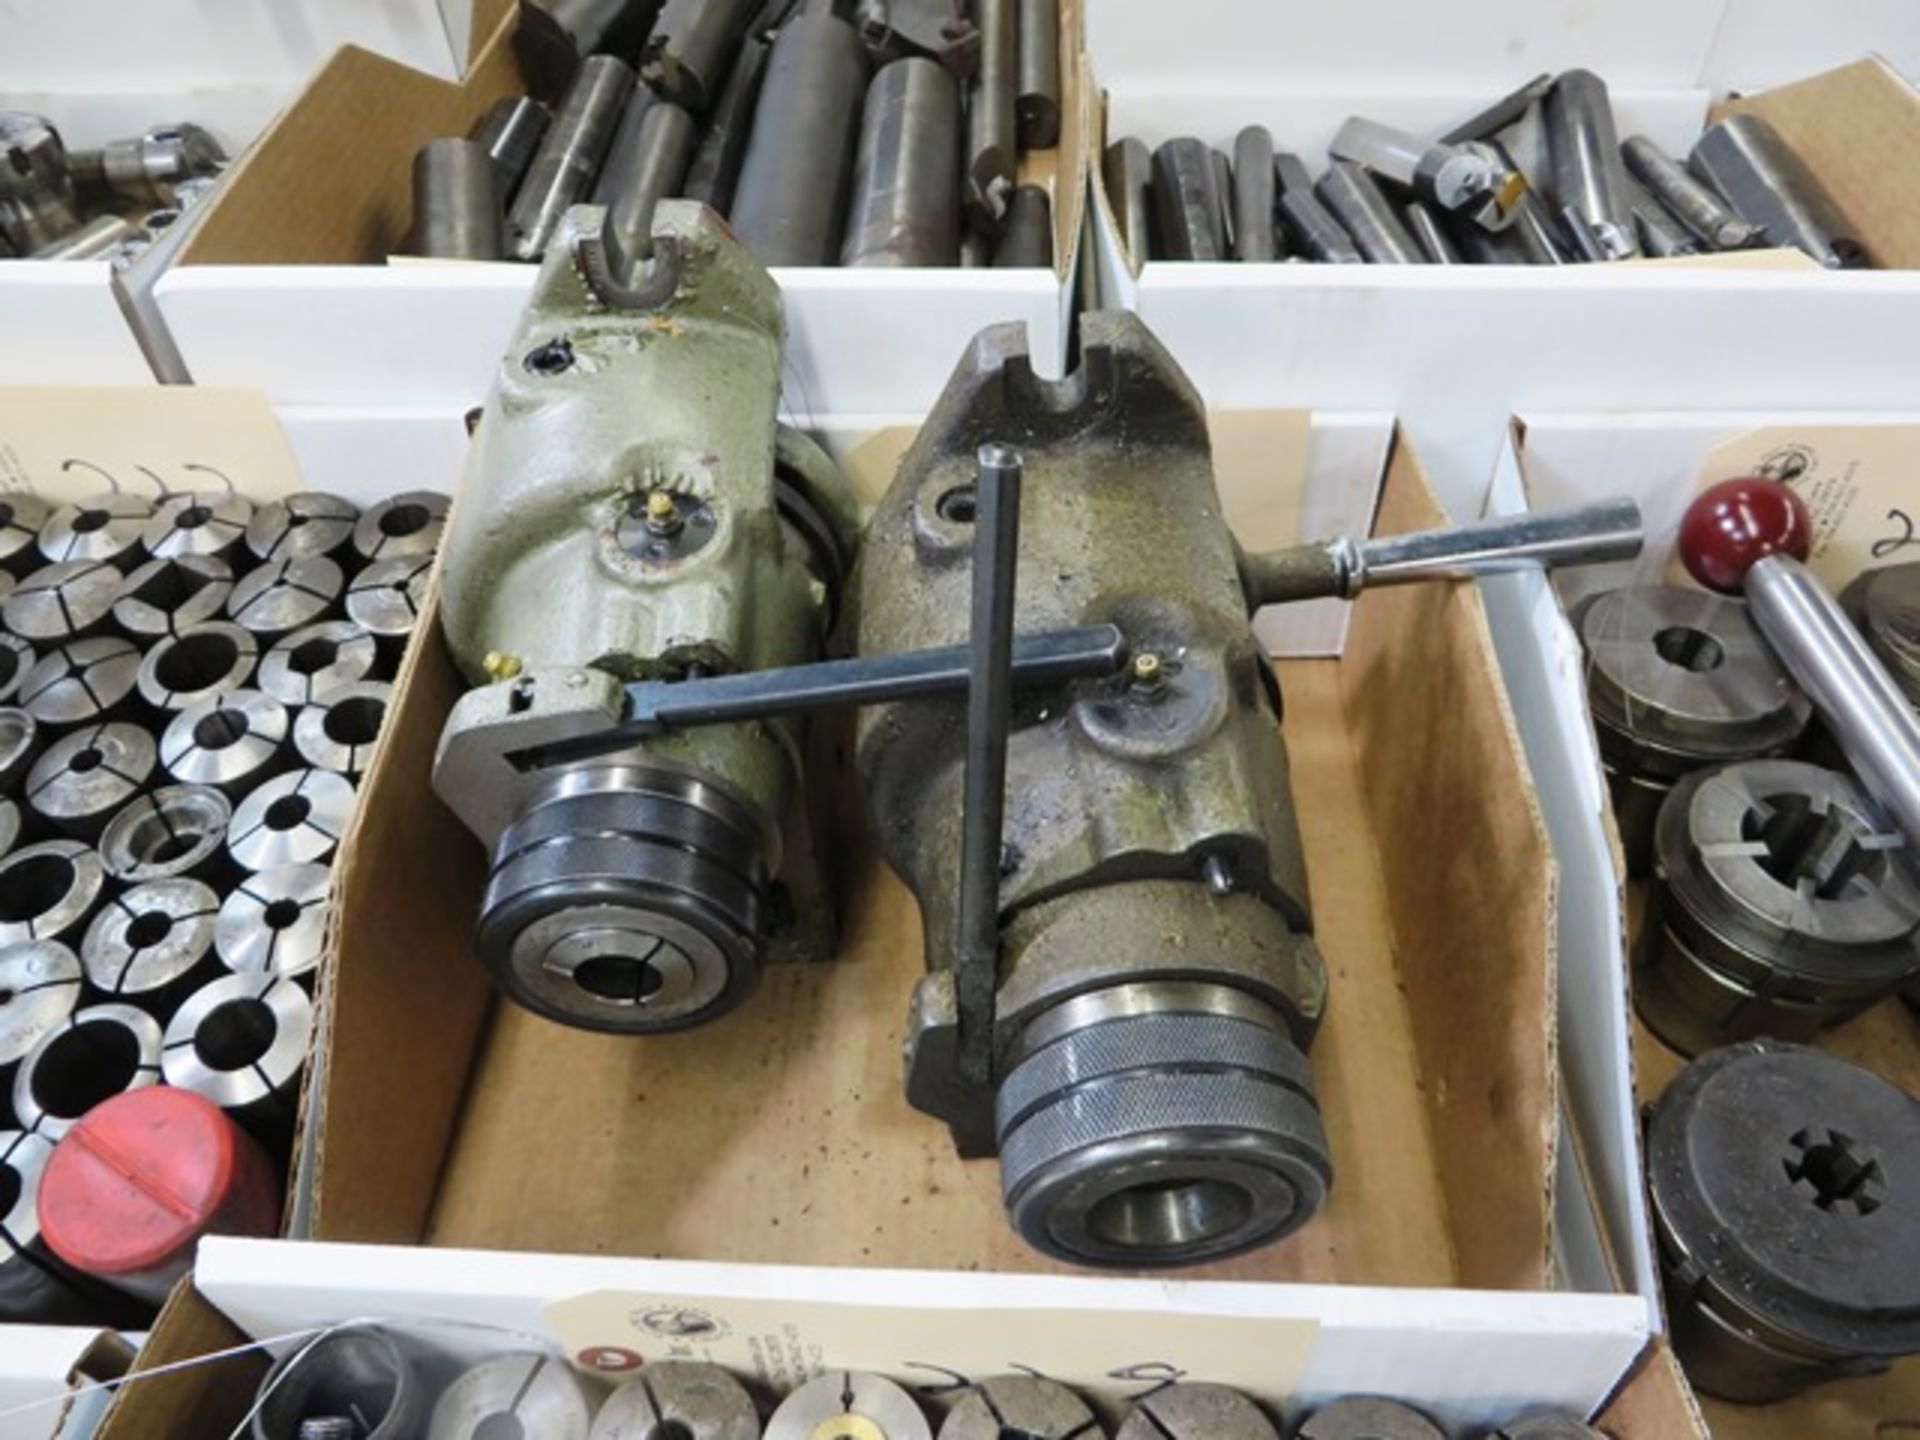 (2) Yasua Type 5C Collet Indexers